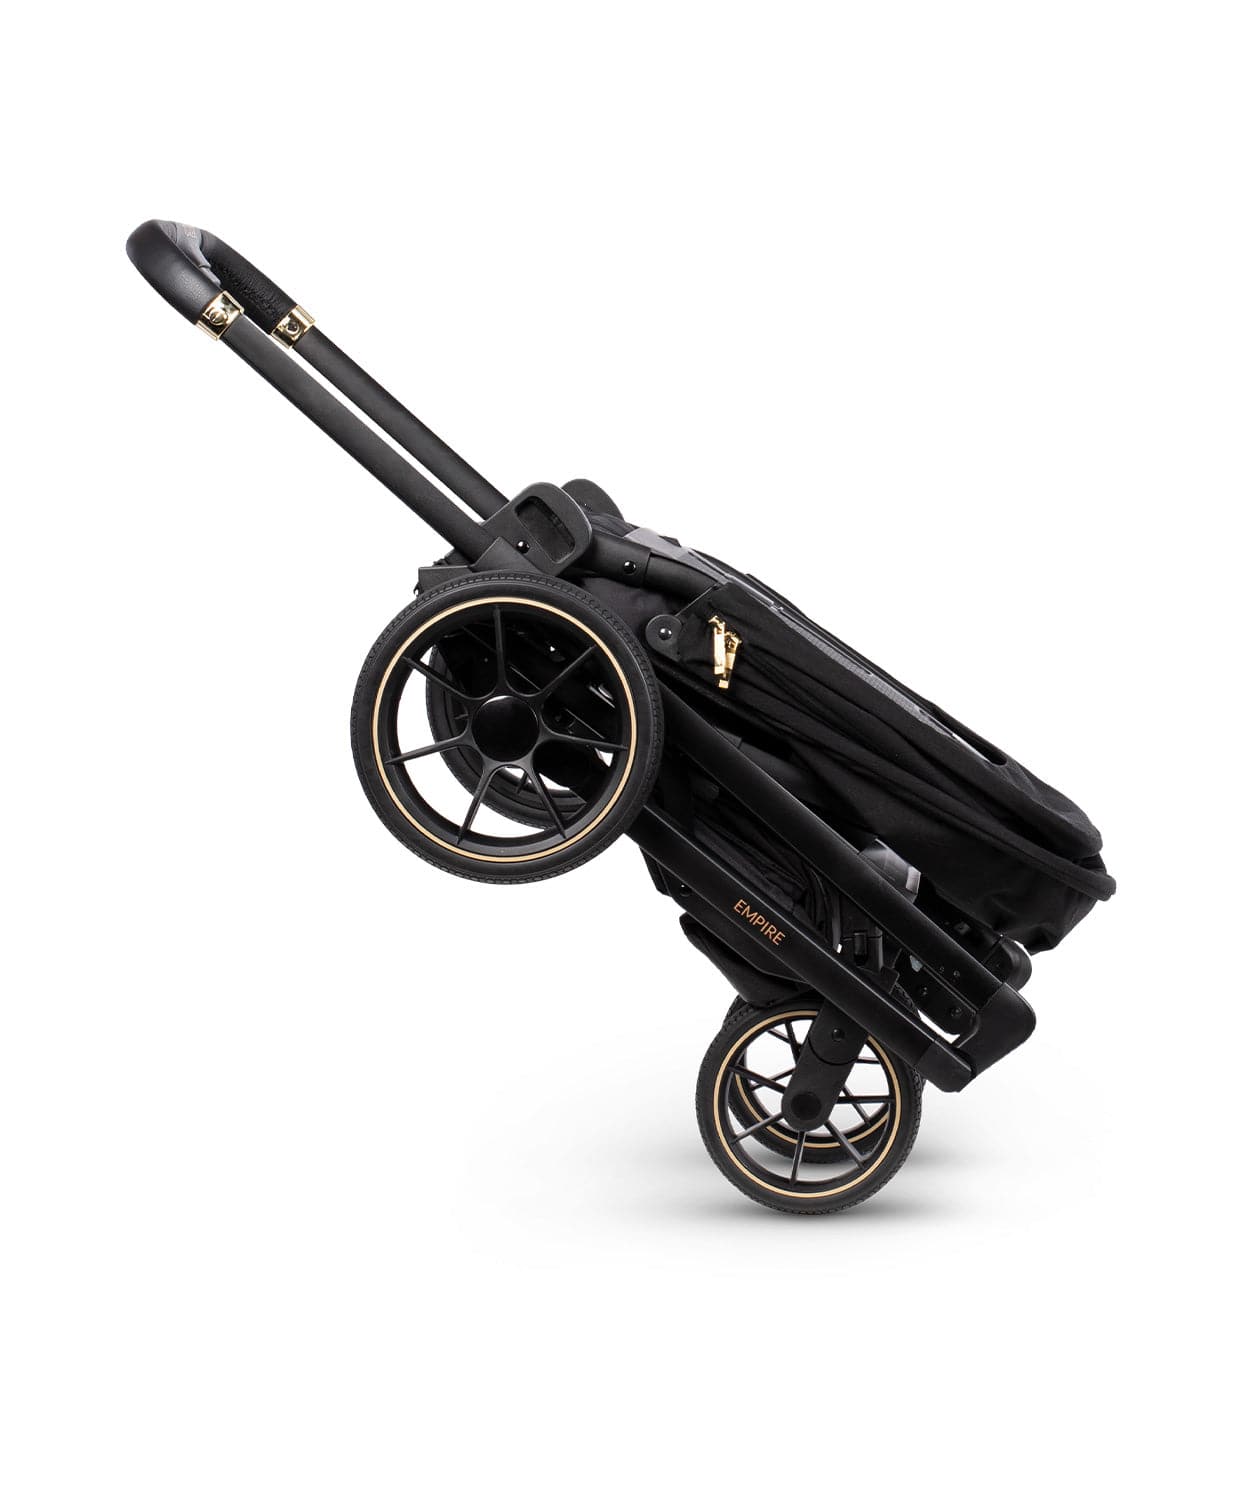 Venicci Empire - Deluxe City Travel System Bundle - Ultra Black -  | For Your Little One